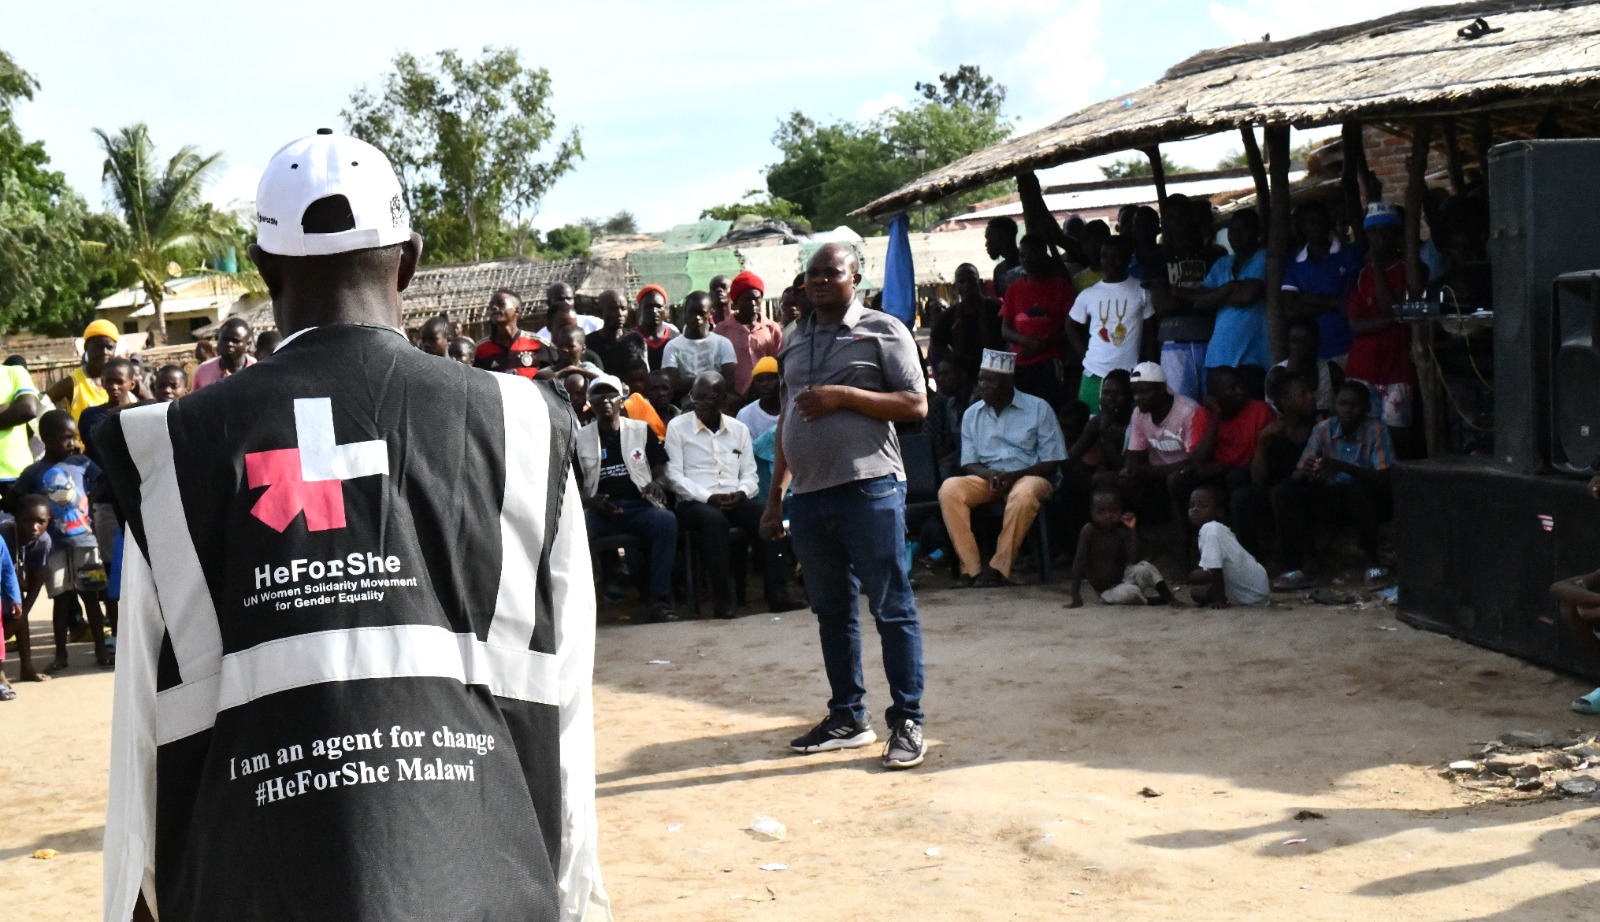 Awareness drive on GBV and HIV prevention in Mangochi, Malawi. Photo: UN Women Malawi. 